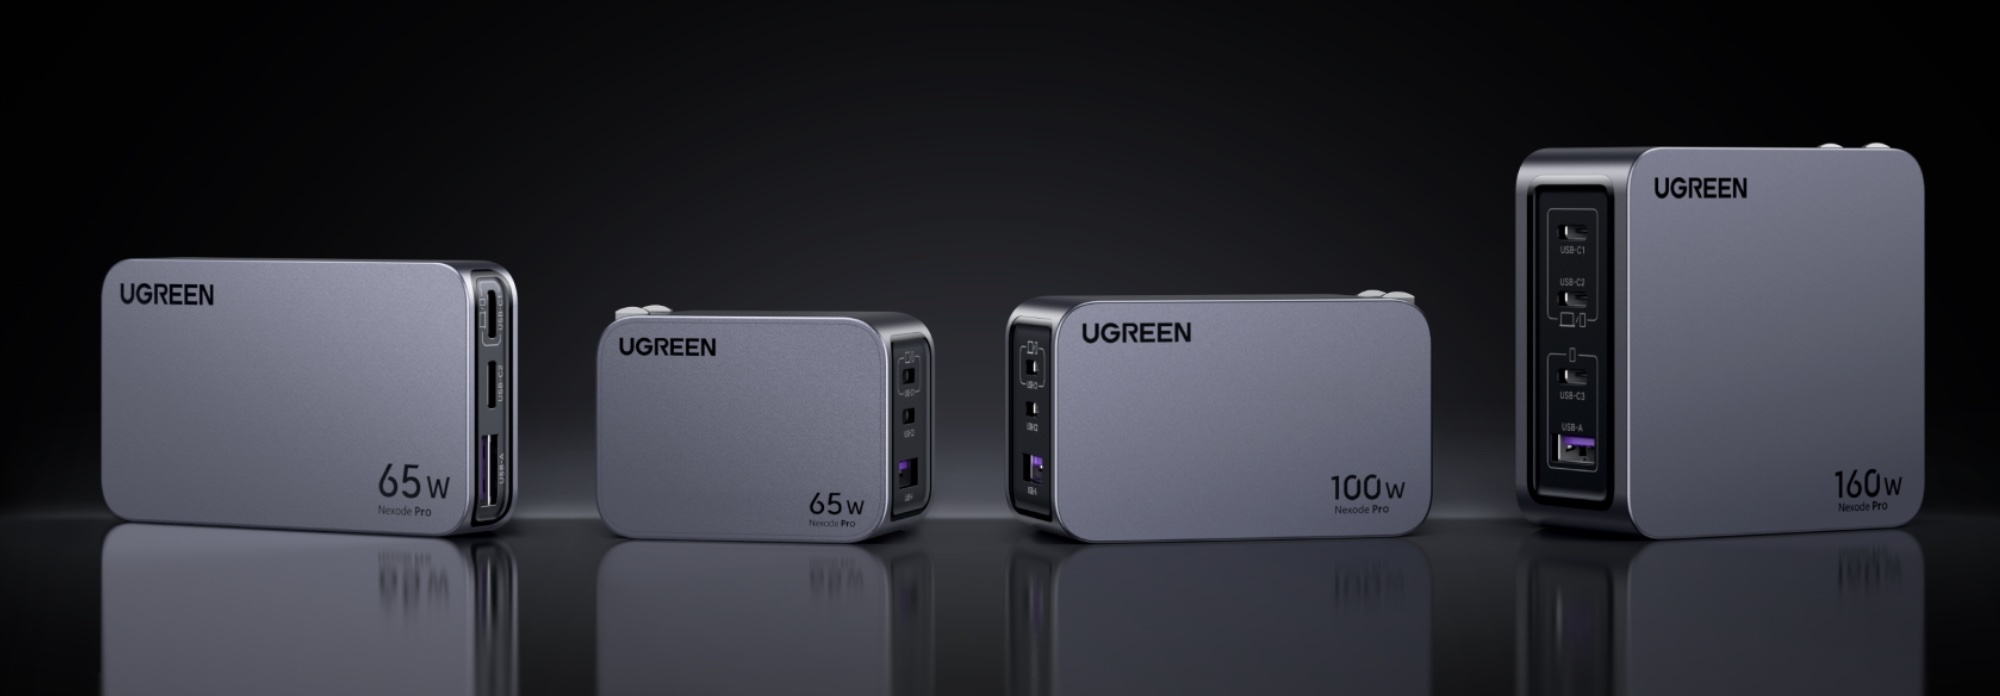 New UGREEN Revodok Pro 13-in-1 dock available worldwide with